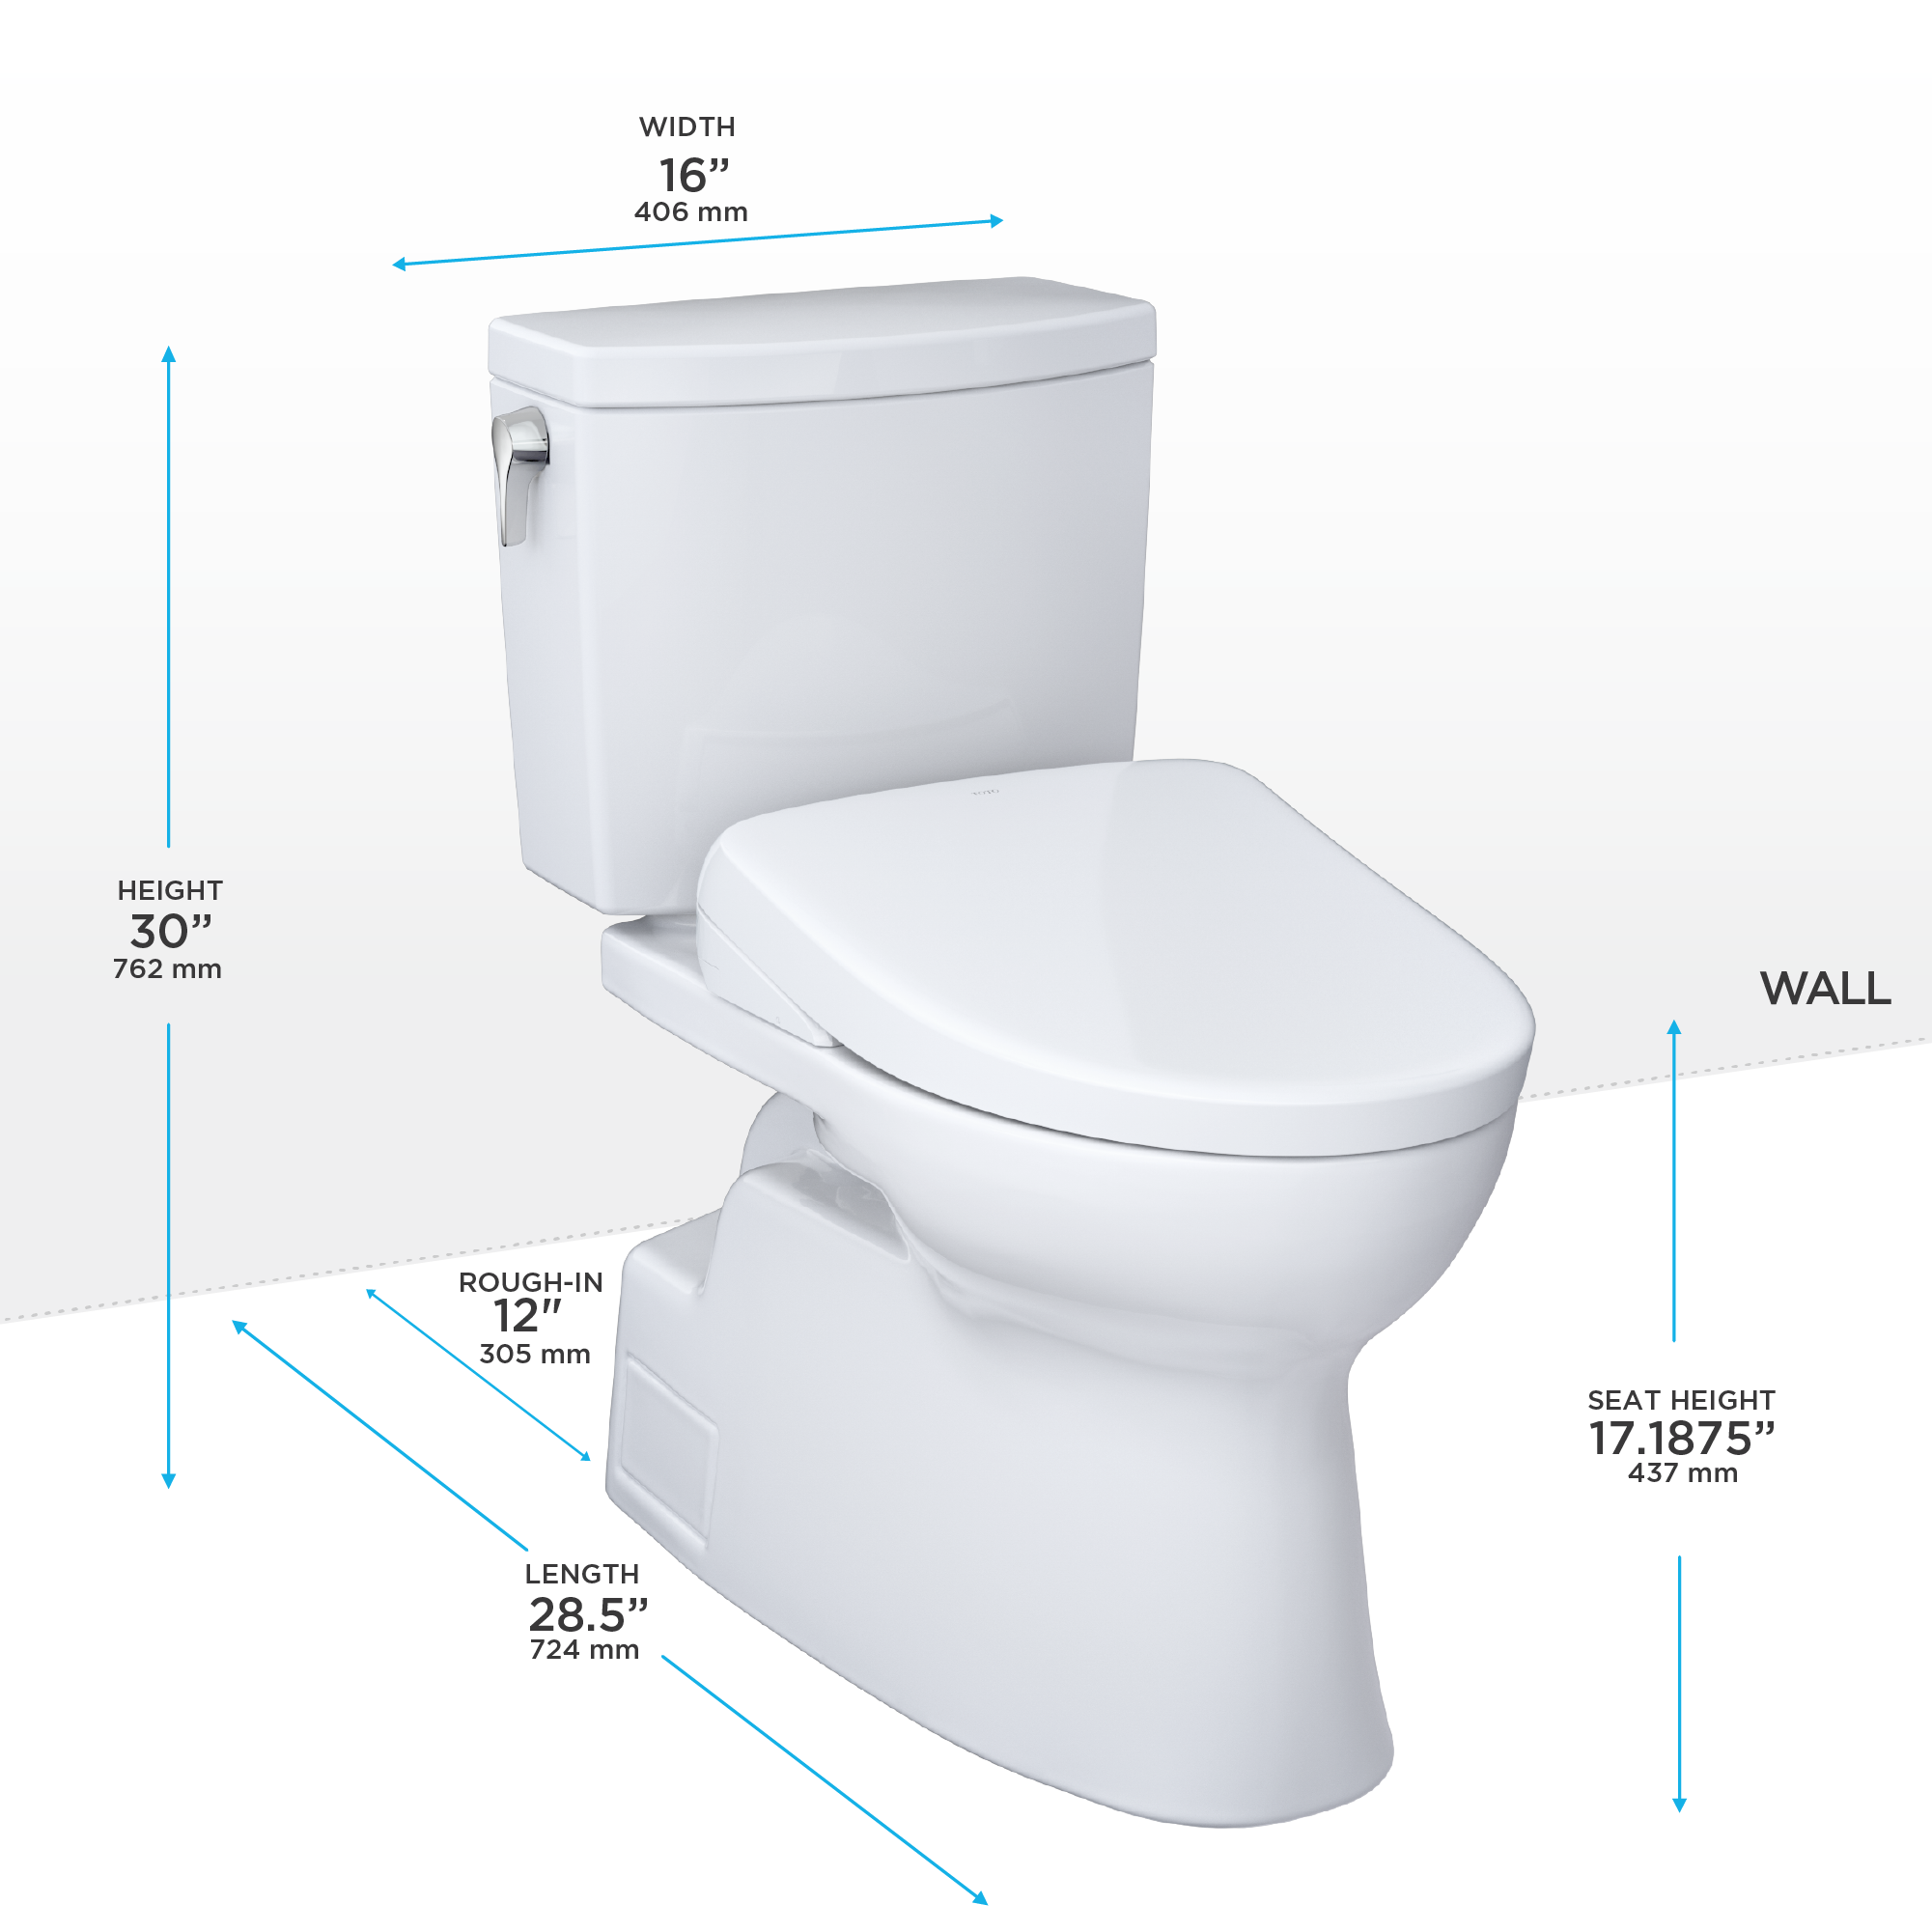 TOTO WASHLET+ Vespin II 1G Two-Piece Elongated 1.0 GPF Toilet and WASHLET+ S7A Contemporary Bidet Seat, Cotton White - MW4744736CUFG#01, MW4744736CUFGA#01